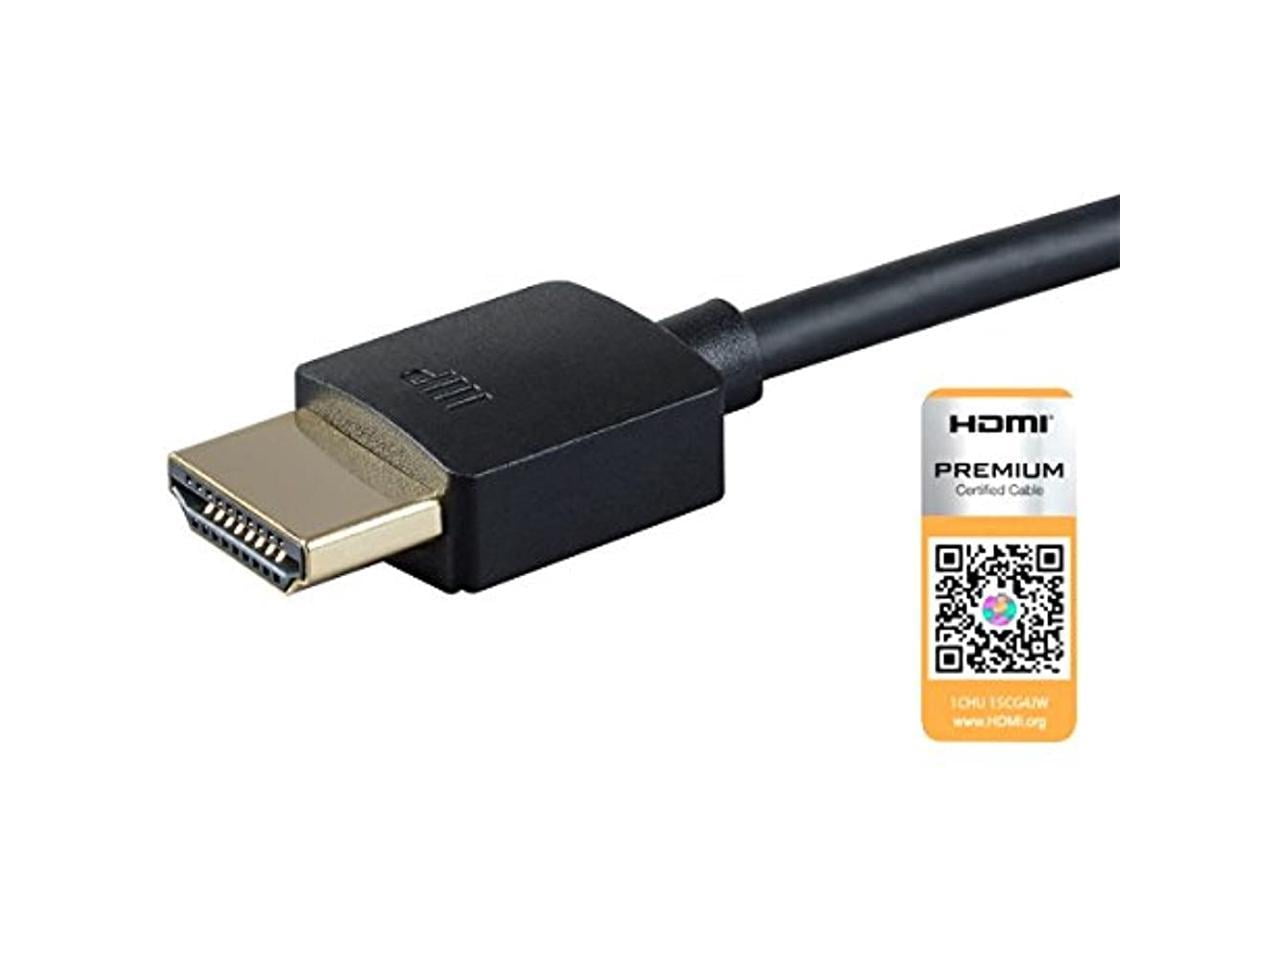 Monoprice - 124184 High Speed HDMI Cable - 3 Feet - Black| Certified  Premium, 4K@60Hz, HDR, 18Gbps, 36AWG, YUV, 4:4:4 - Ultra Slim Series